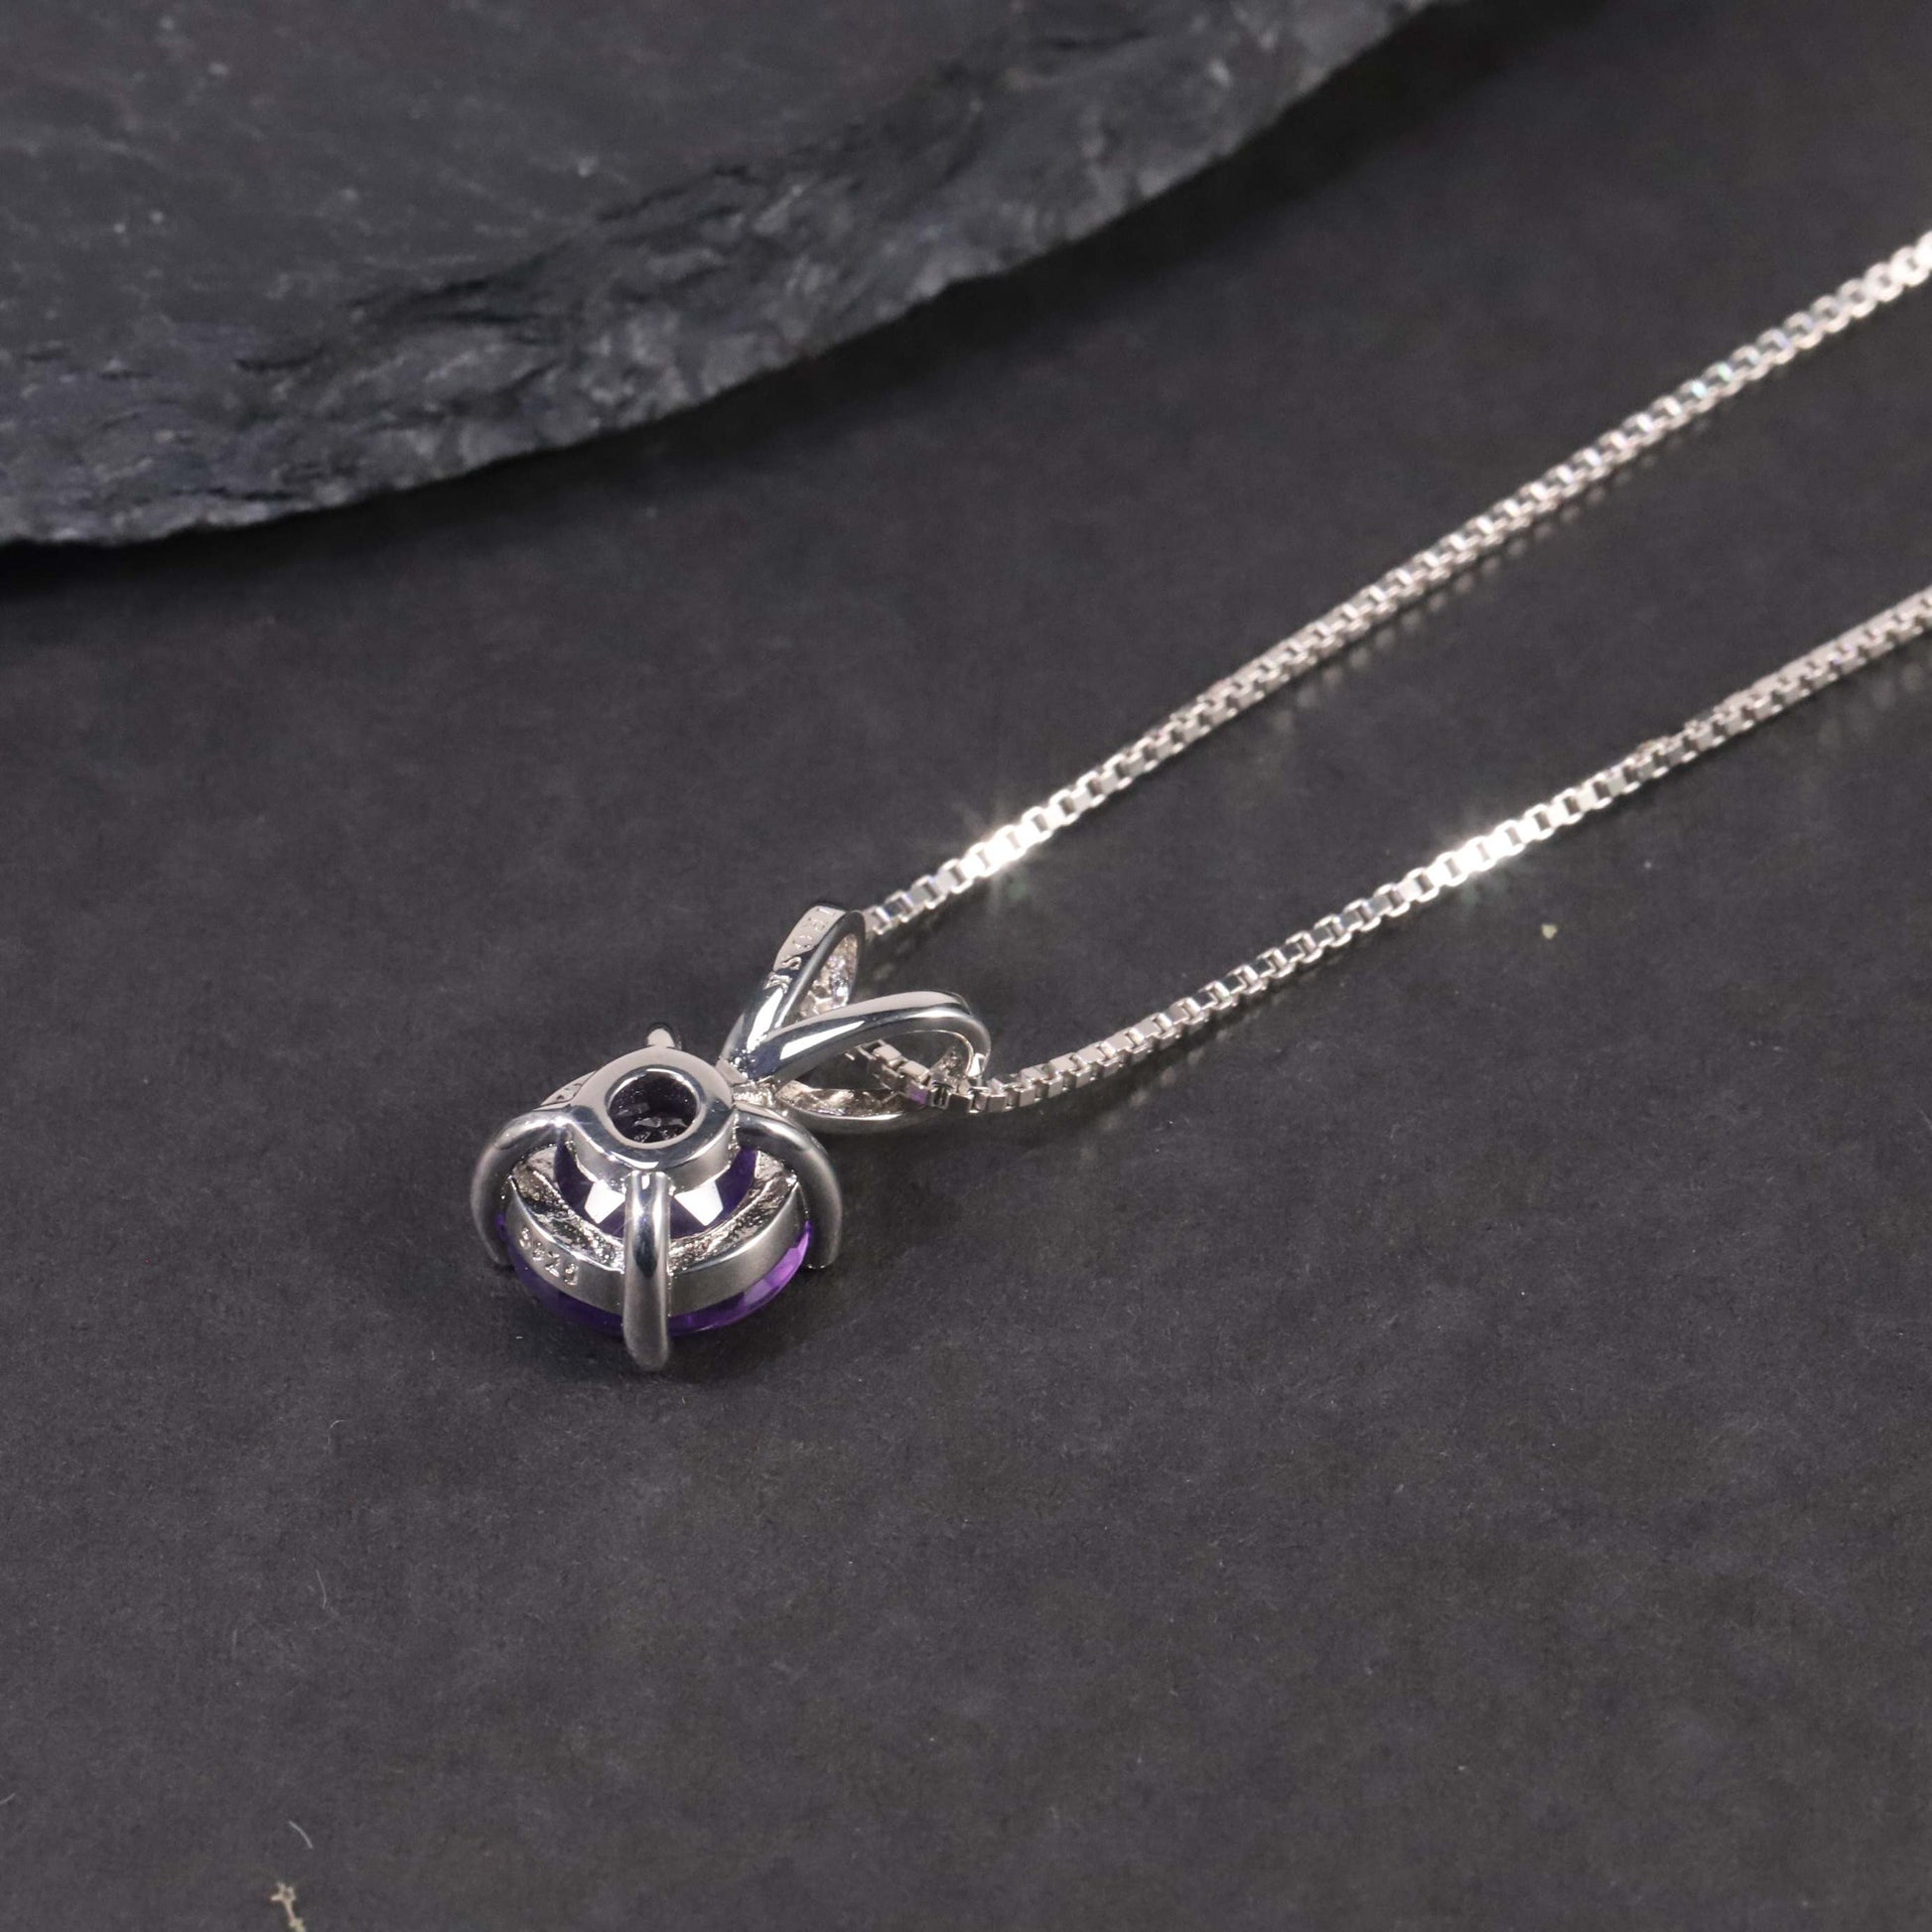 Back view of the Round Shape Amethyst Pendant, showcasing the smooth and polished finish of the sterling silver setting.